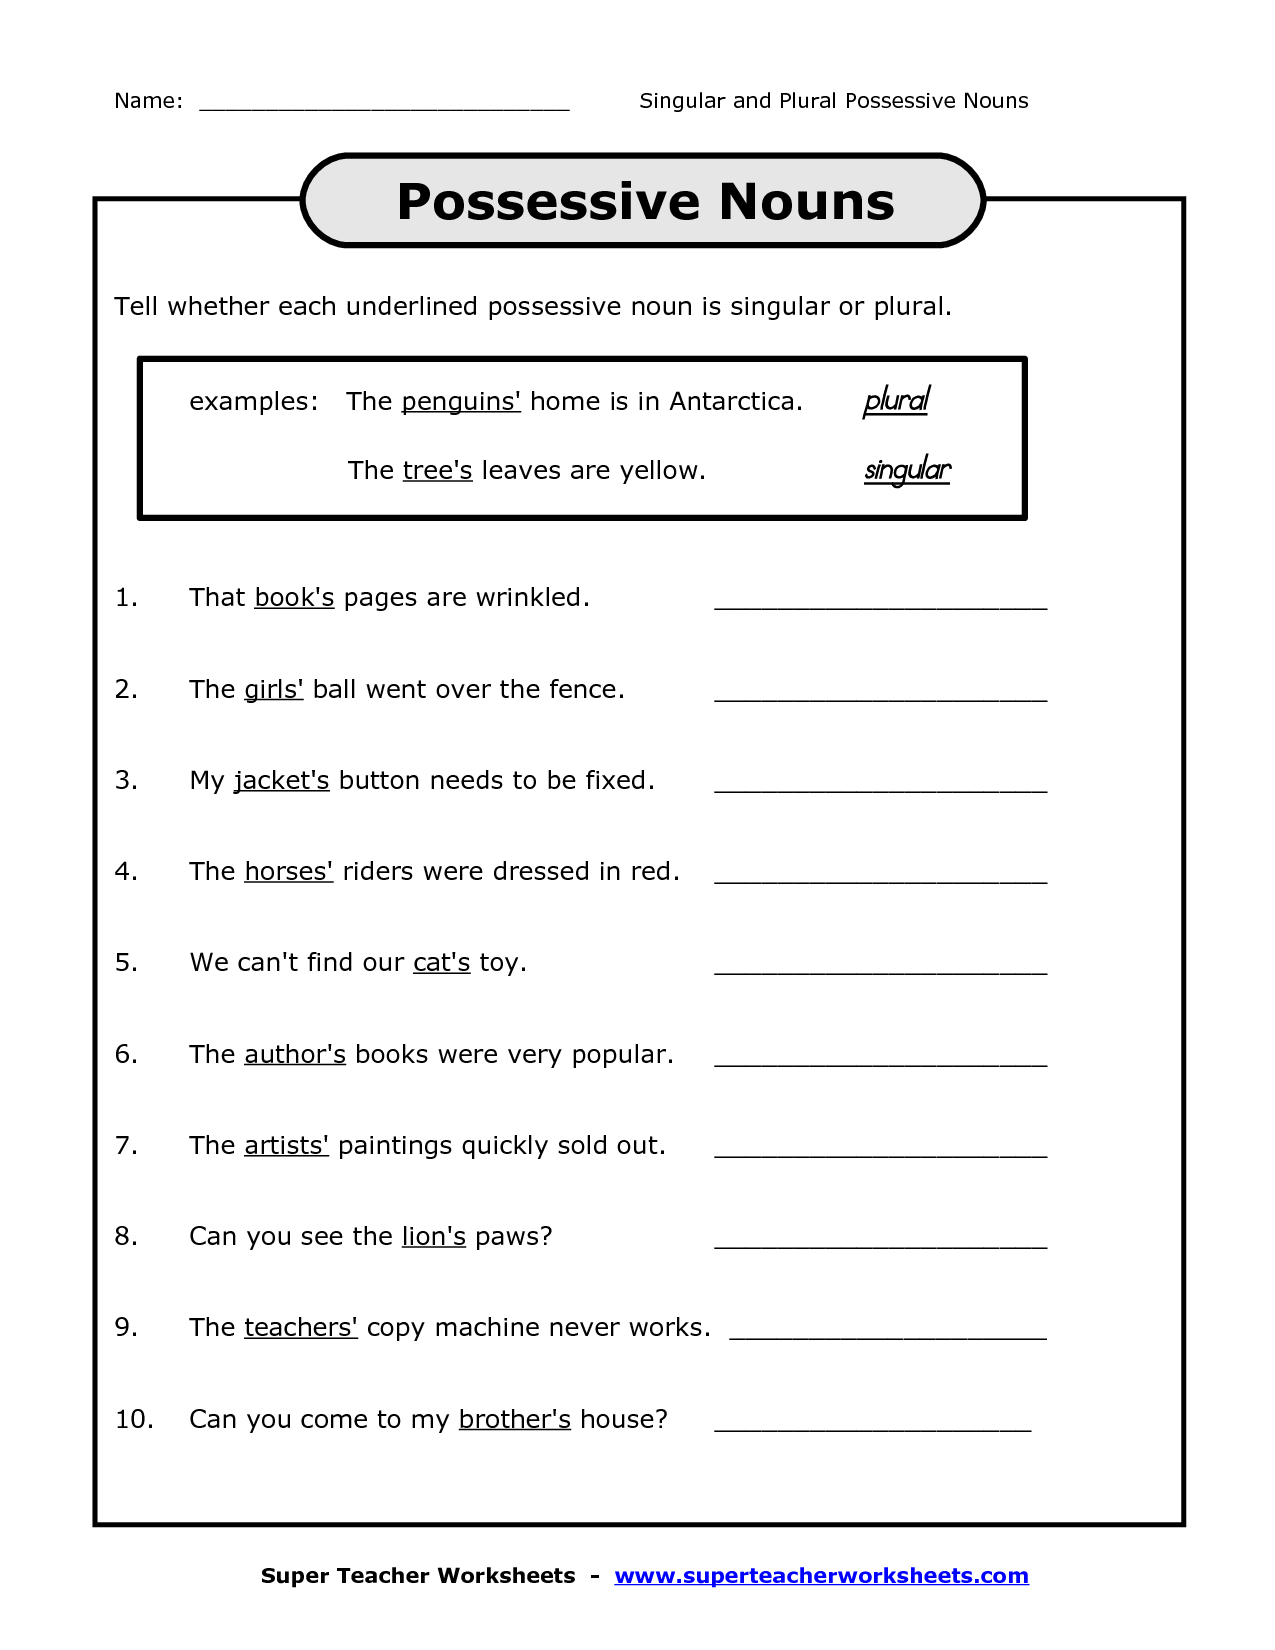 Plural And Possessive Nouns Worksheets For Middle School